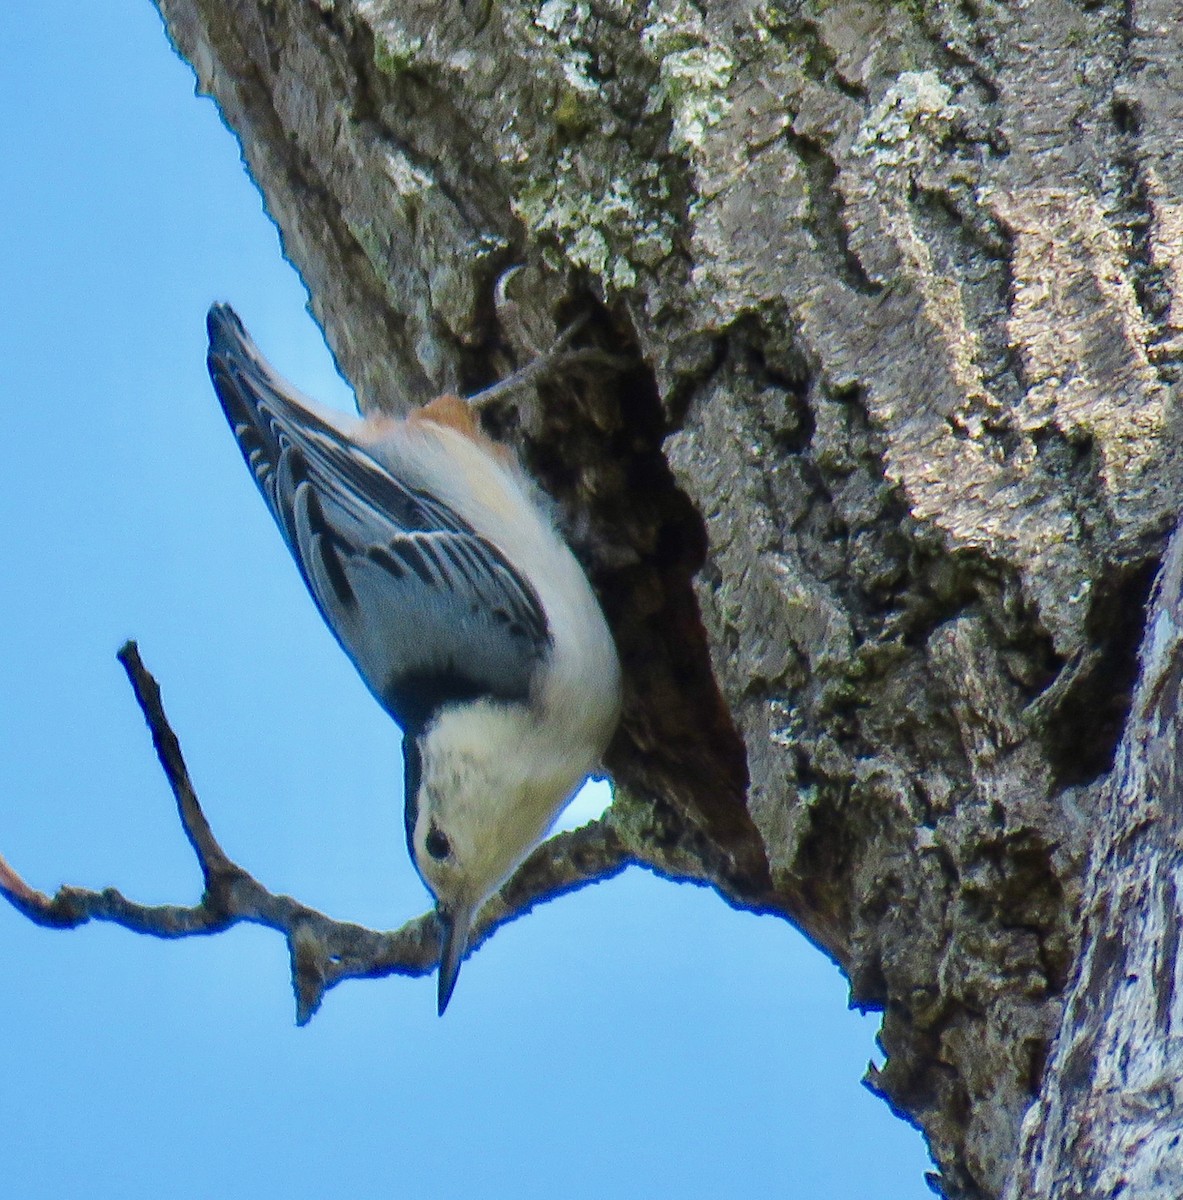 White-breasted Nuthatch - Ann Tanner